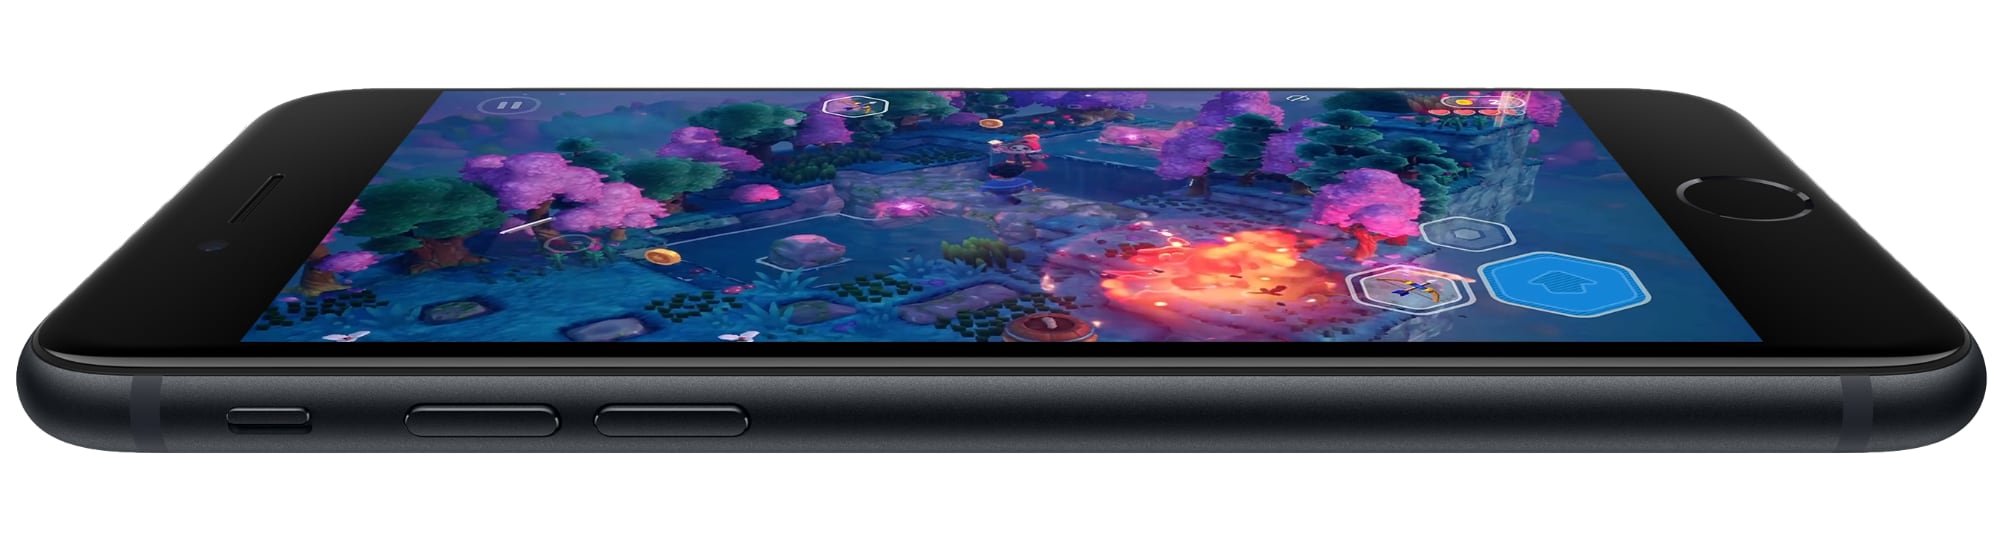 iphone se gaming a15